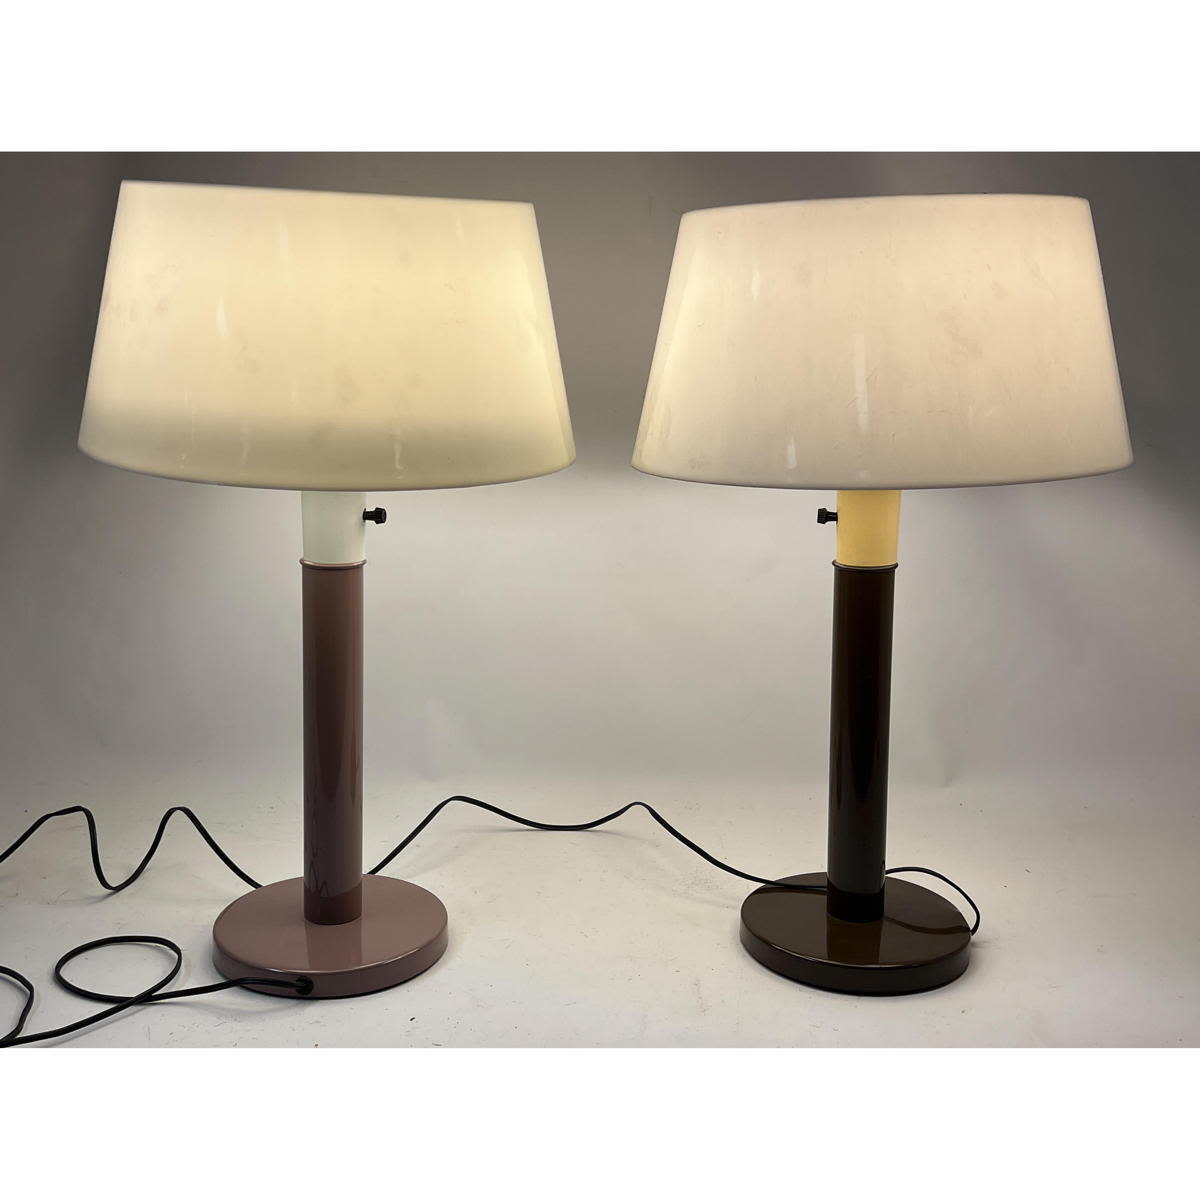 2pc Modernist Table Lamps. One